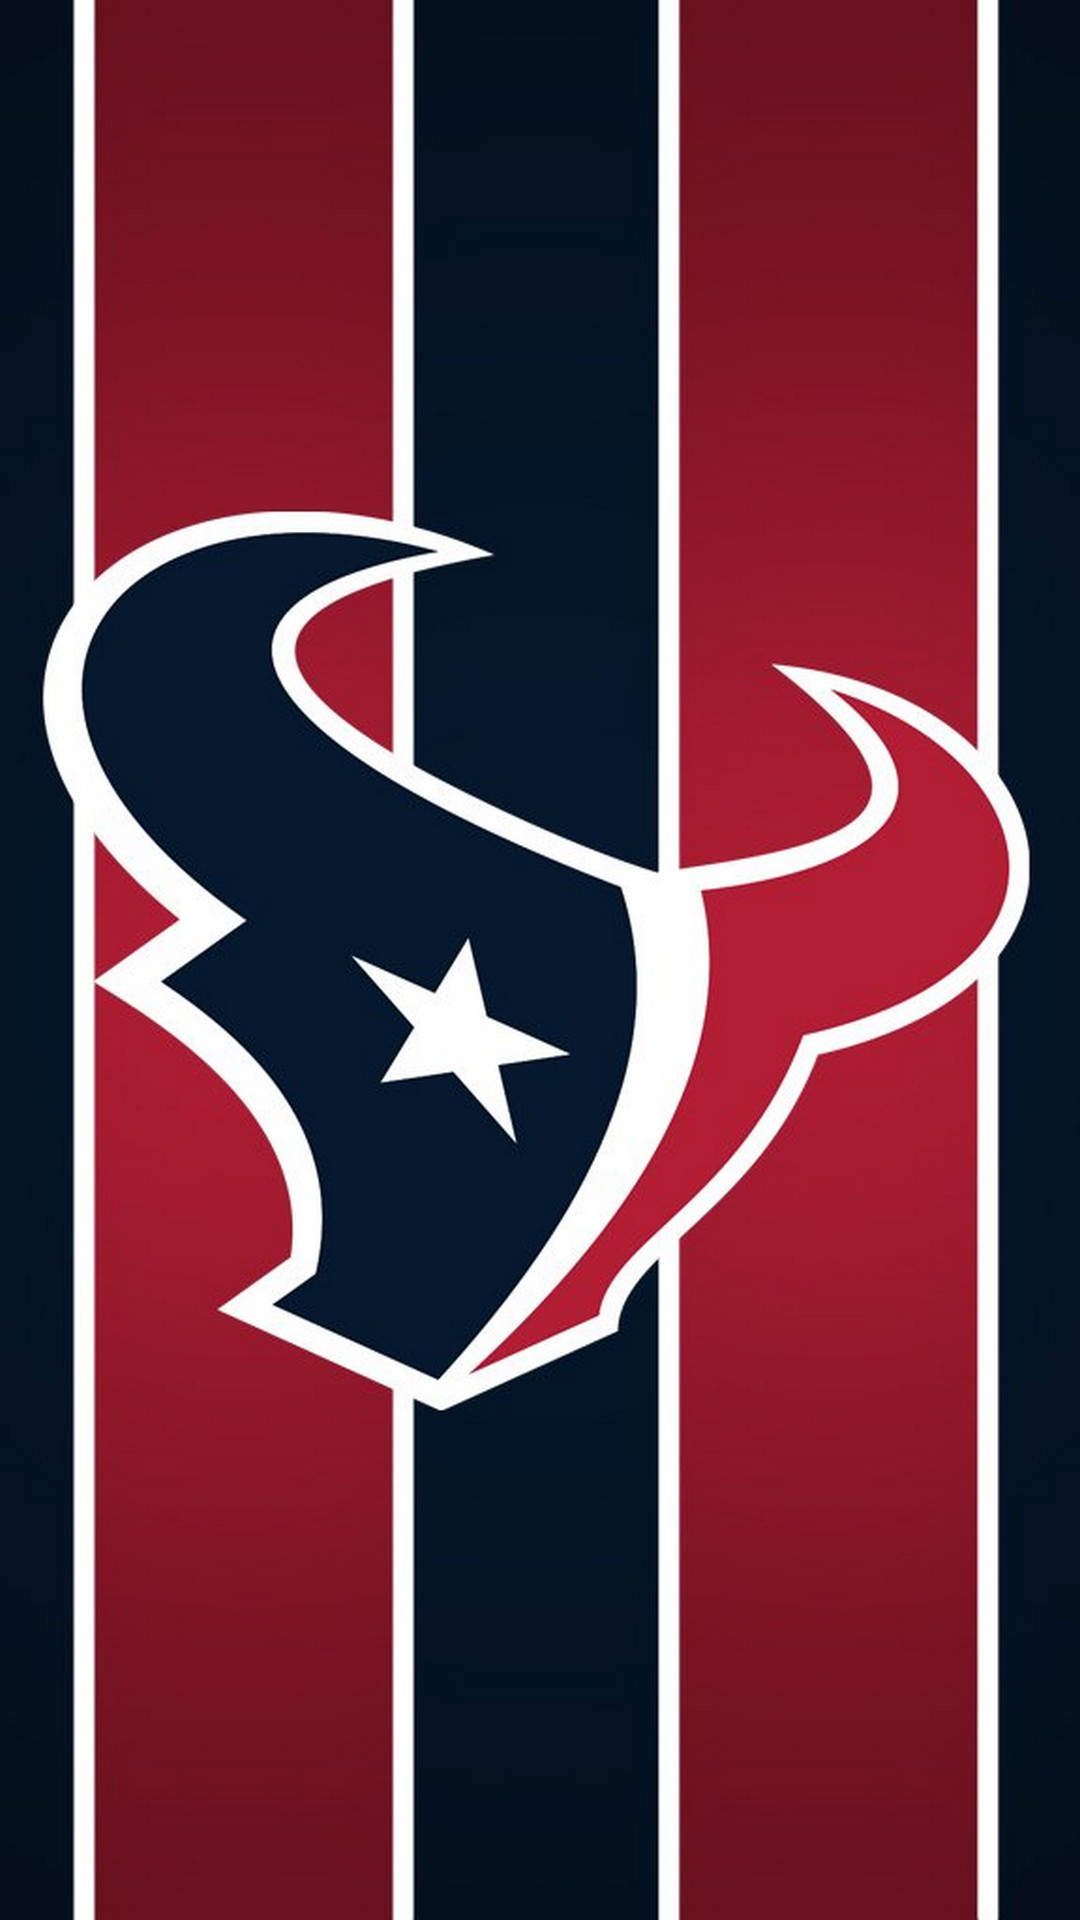 Houston Texans iPhone Wallpaper High Quality With high-resolution 1080X1920 pixel. Donwload and set as wallpaper for your iPhone X, iPhone XS home screen backgrounds, XS Max, XR, iPhone8 lock screen wallpaper, iPhone 7, 6, SE, and other mobile devices